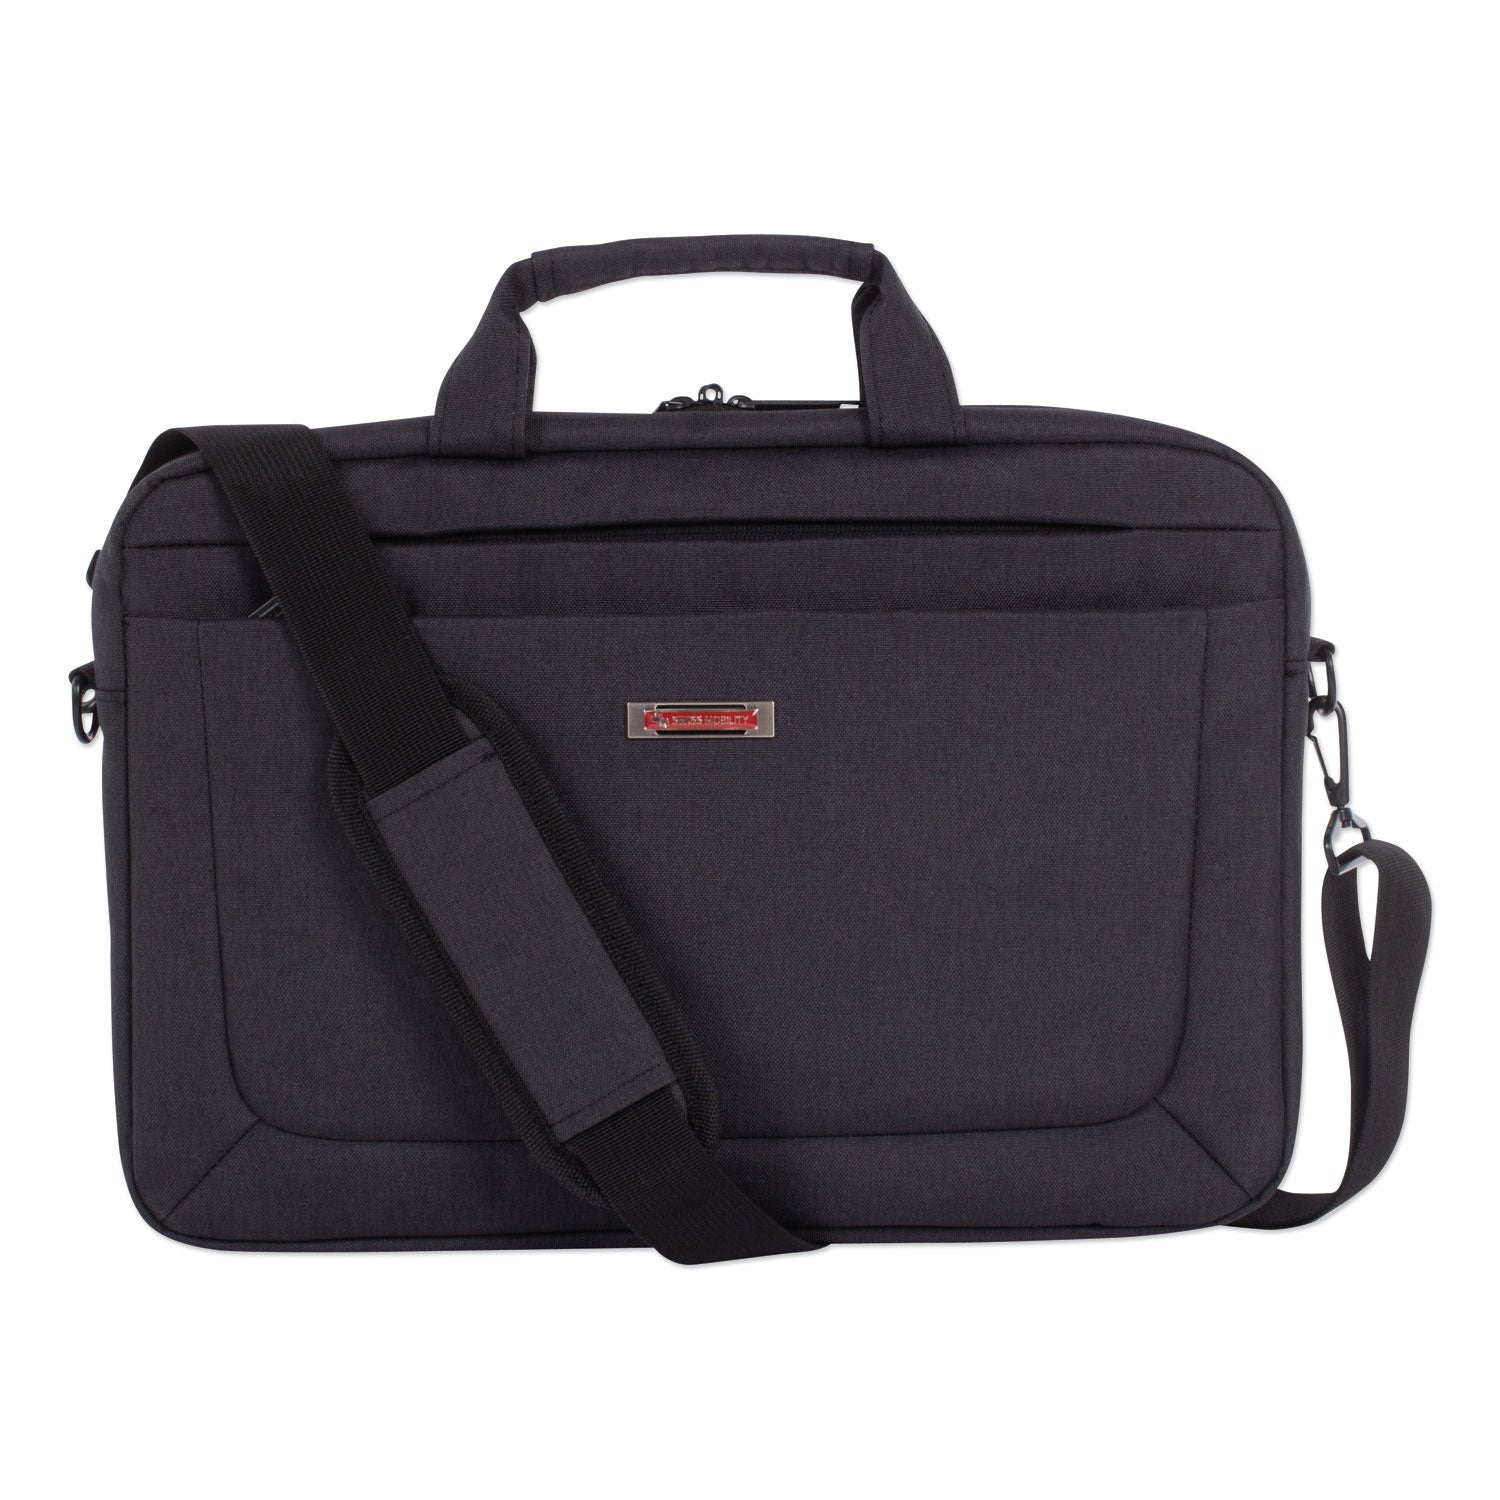 cadence-slim-briefcase-fits-devices-up-to-156-polyester-35-x-35-x-16-charcoal_swzexb1010smch - 2